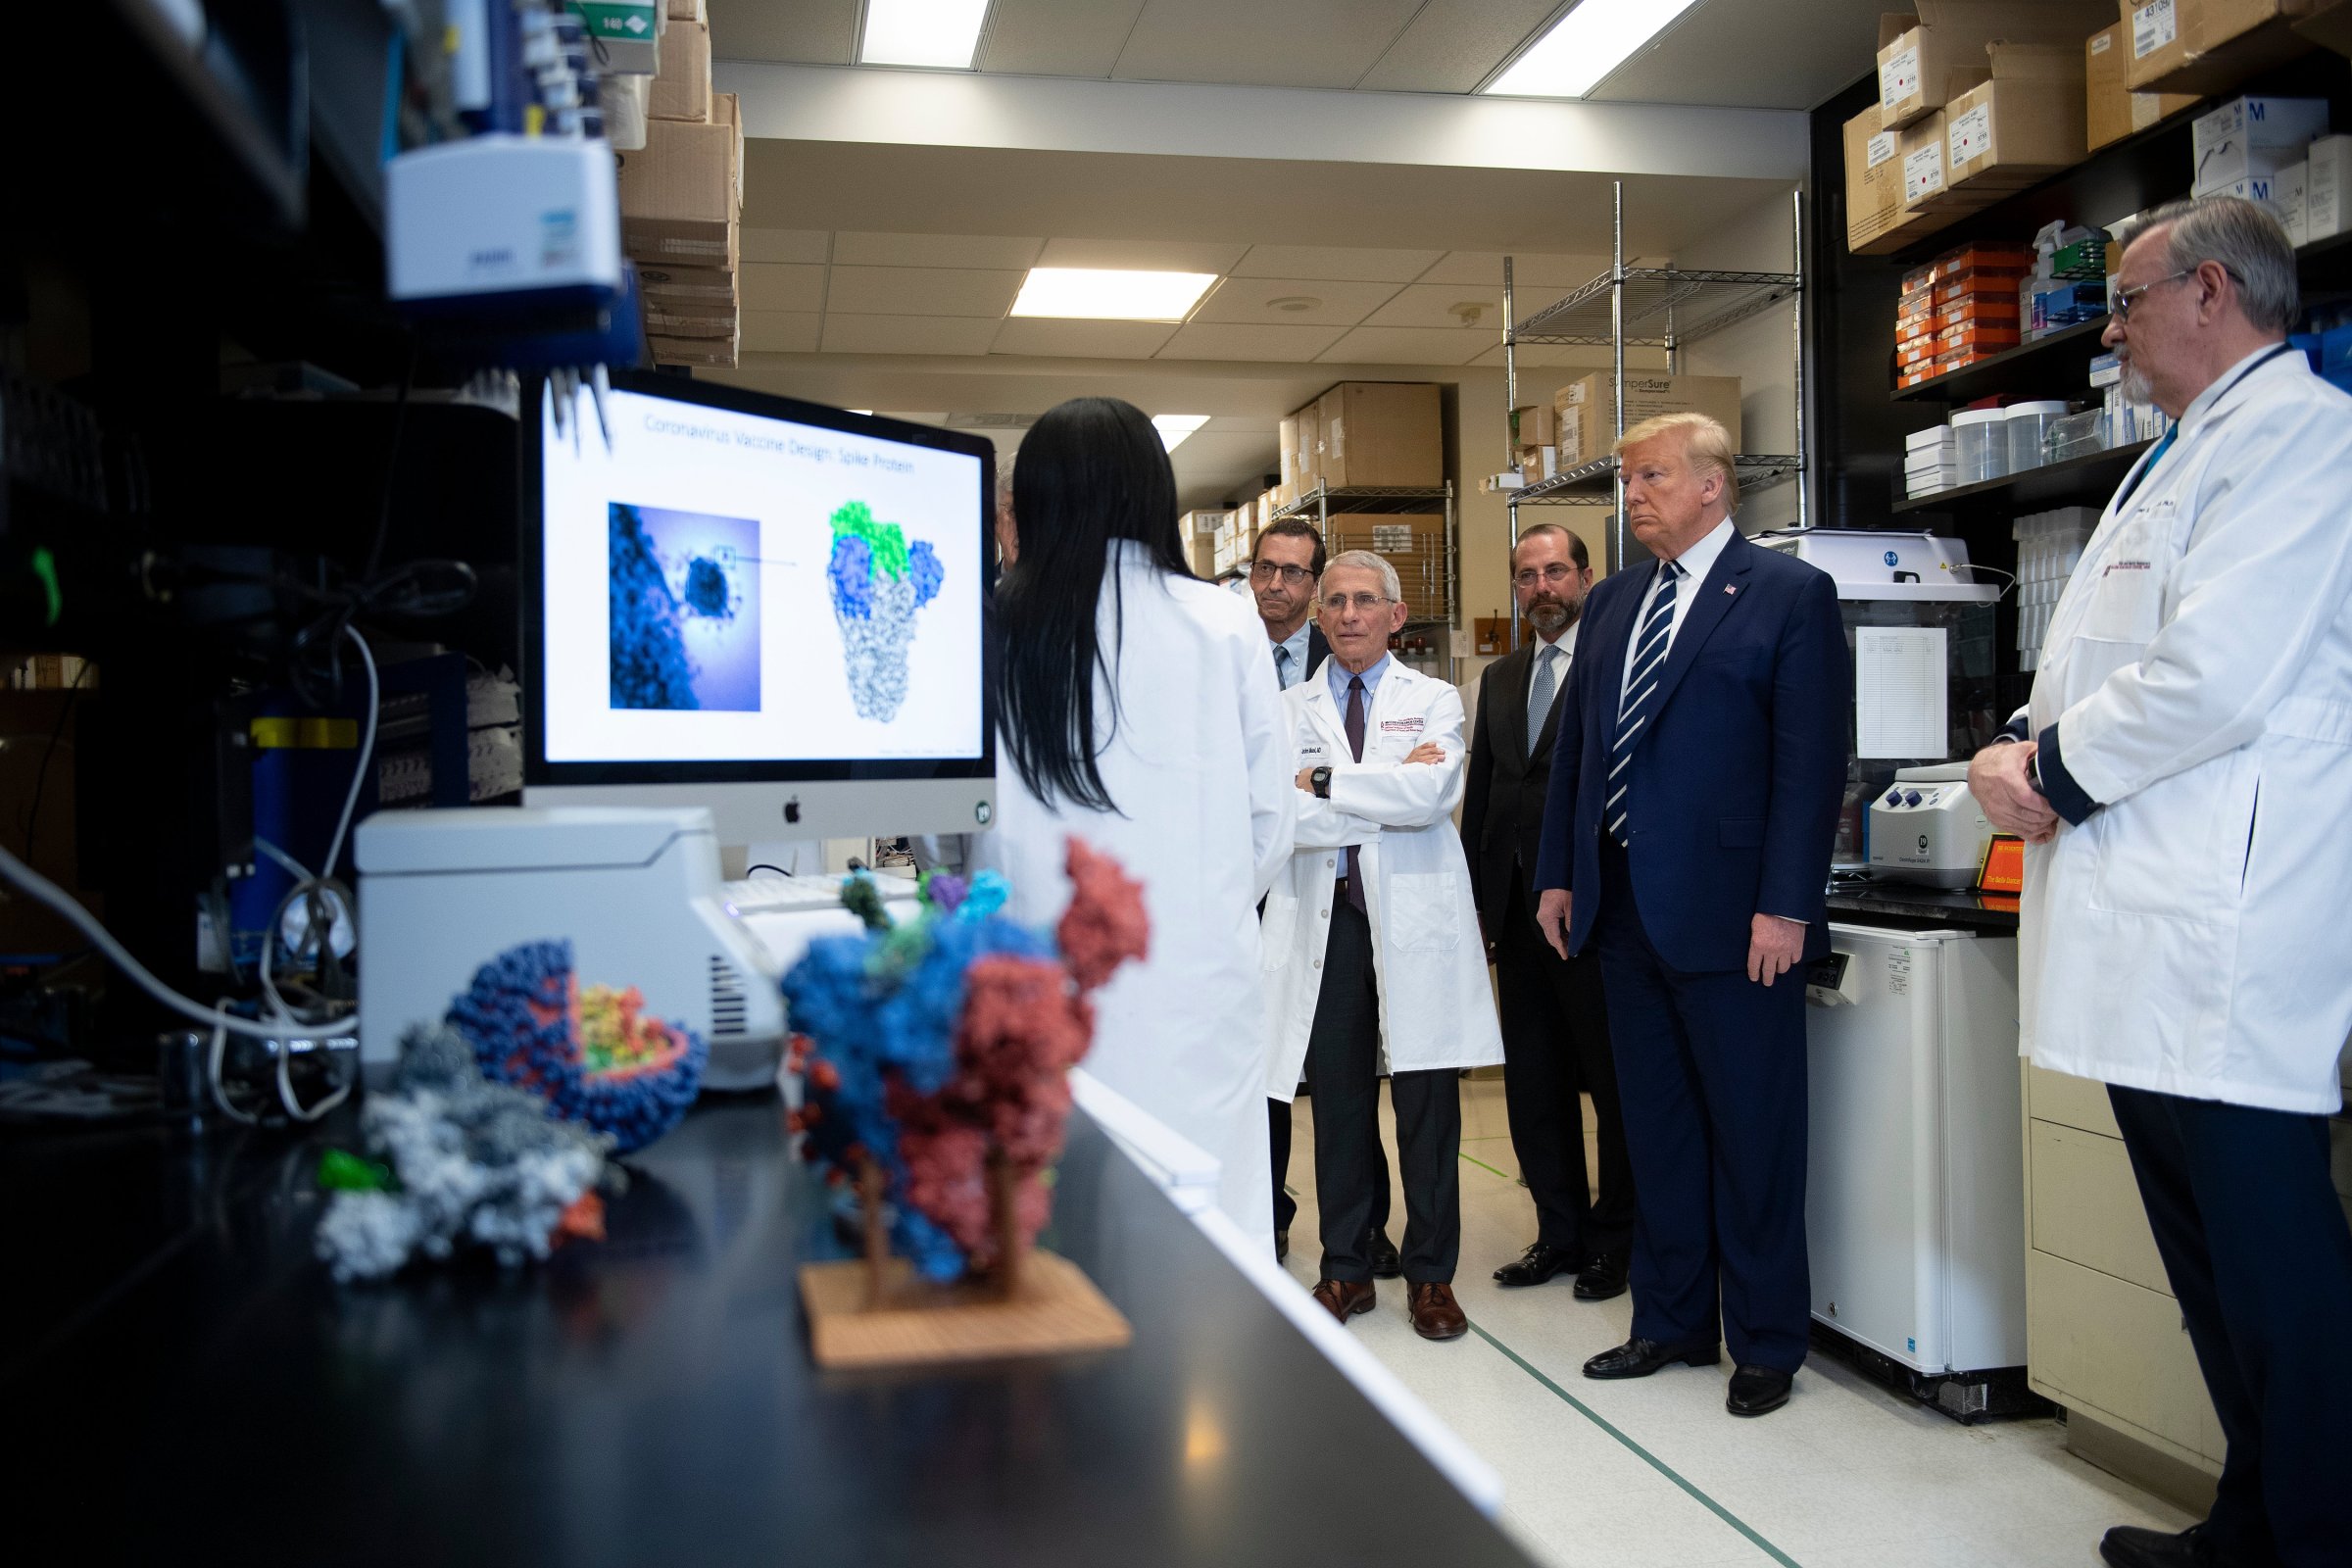 National Institute of Allergy and Infectious Diseases Director Tony Fauci (C) looks on next to US President Donald Trump during a tour of the National Institutes of Health's Vaccine Research Center March 3, 2020, in Bethesda, Maryland